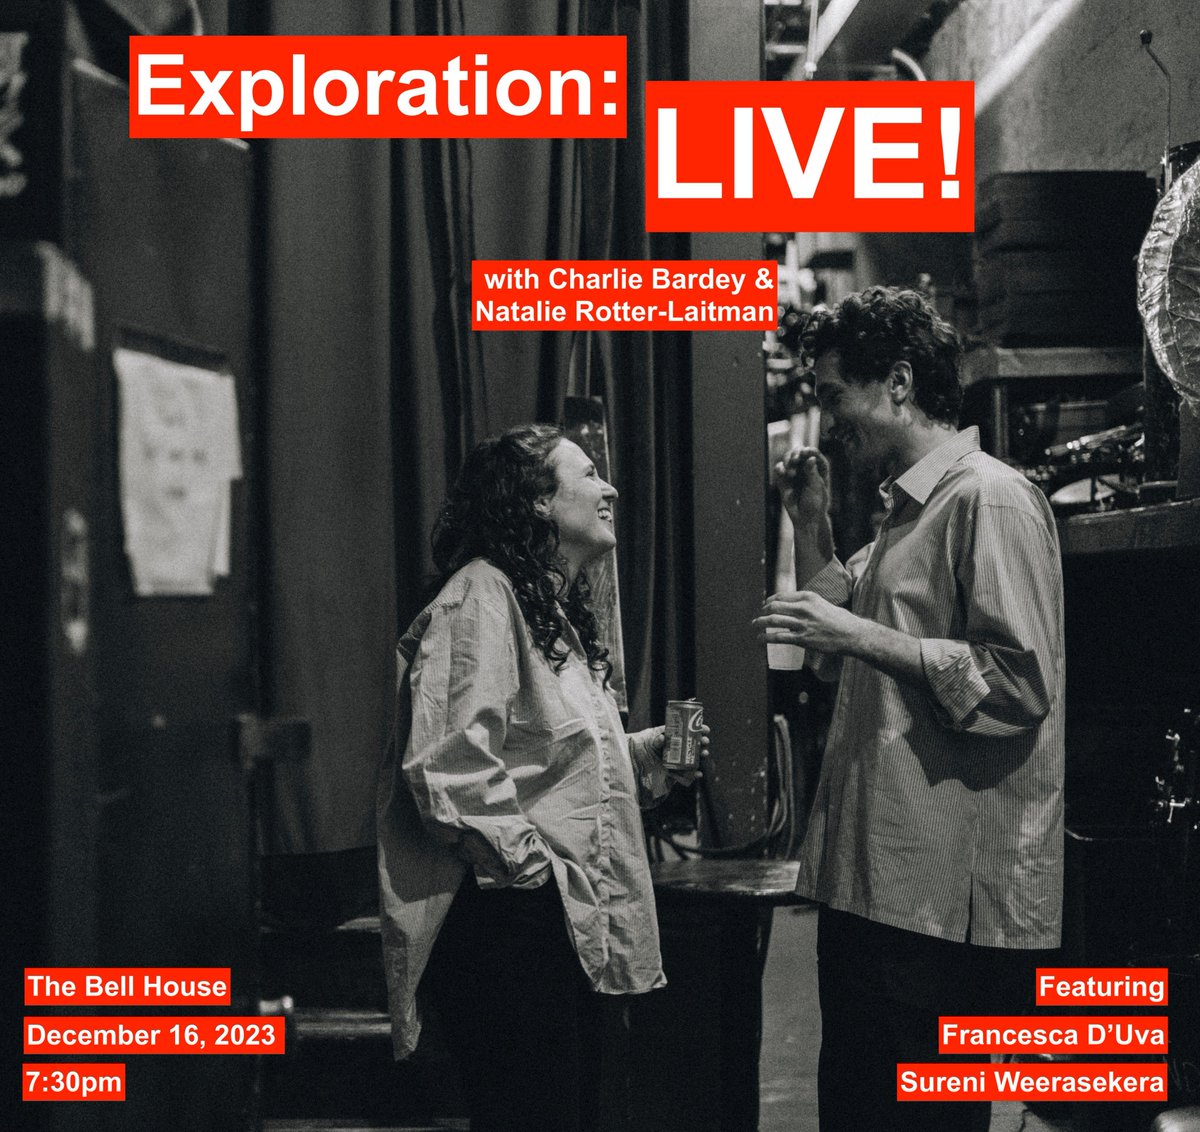 TONIGHT: @ExplorationLive with @chunkbardey and @natrotlait is SOLD OUT! Featuring special guests @sureni and @to_die_for_duva! 7PM Doors ∙ 7:30PM Show Details: tinyurl.com/mr3uas6m